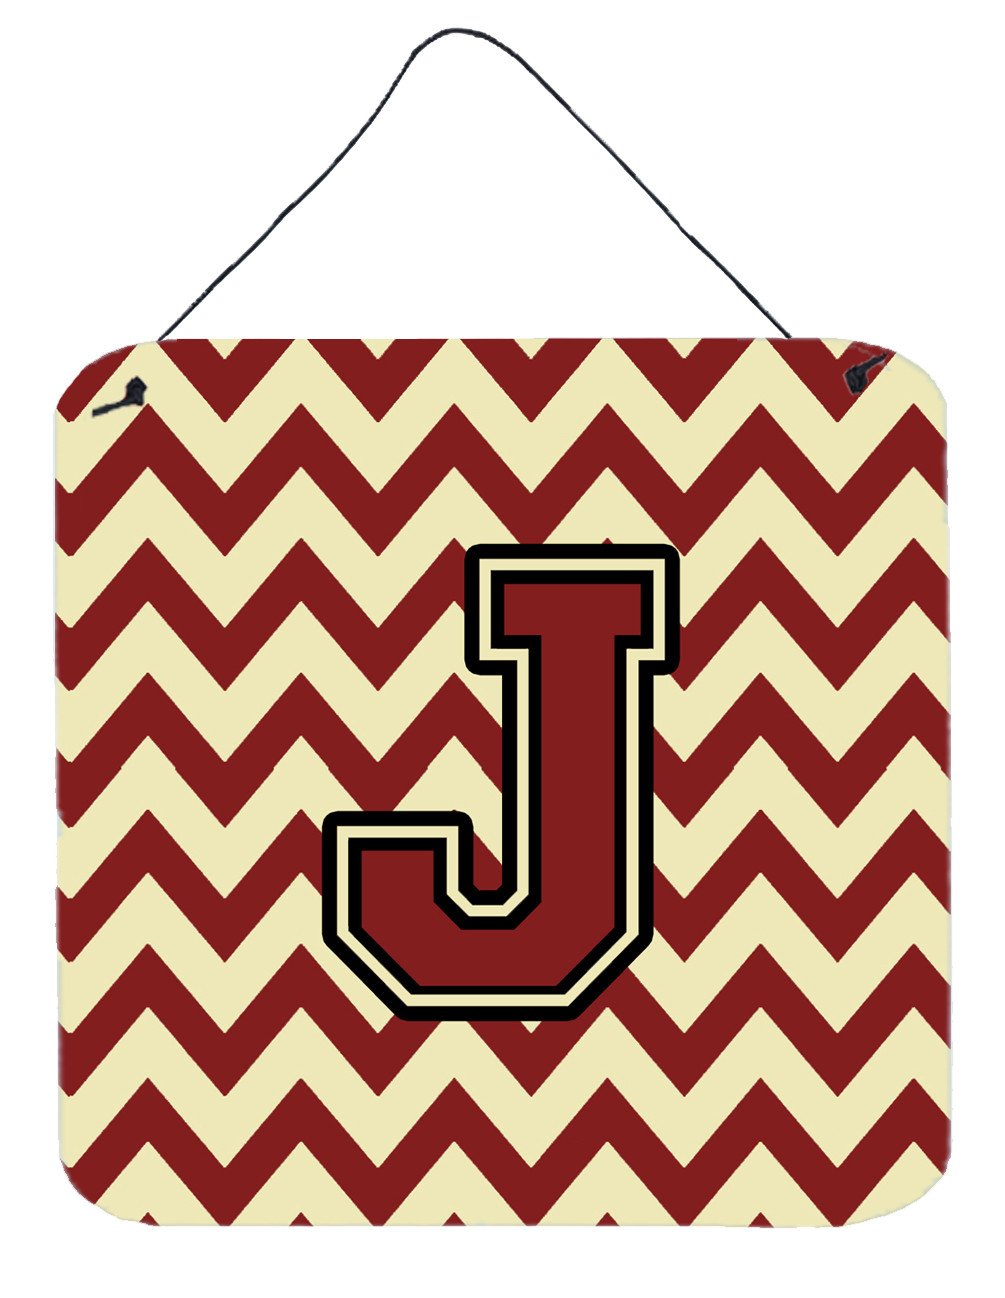 Letter J Chevron Maroon and Gold Wall or Door Hanging Prints CJ1061-JDS66 by Caroline's Treasures